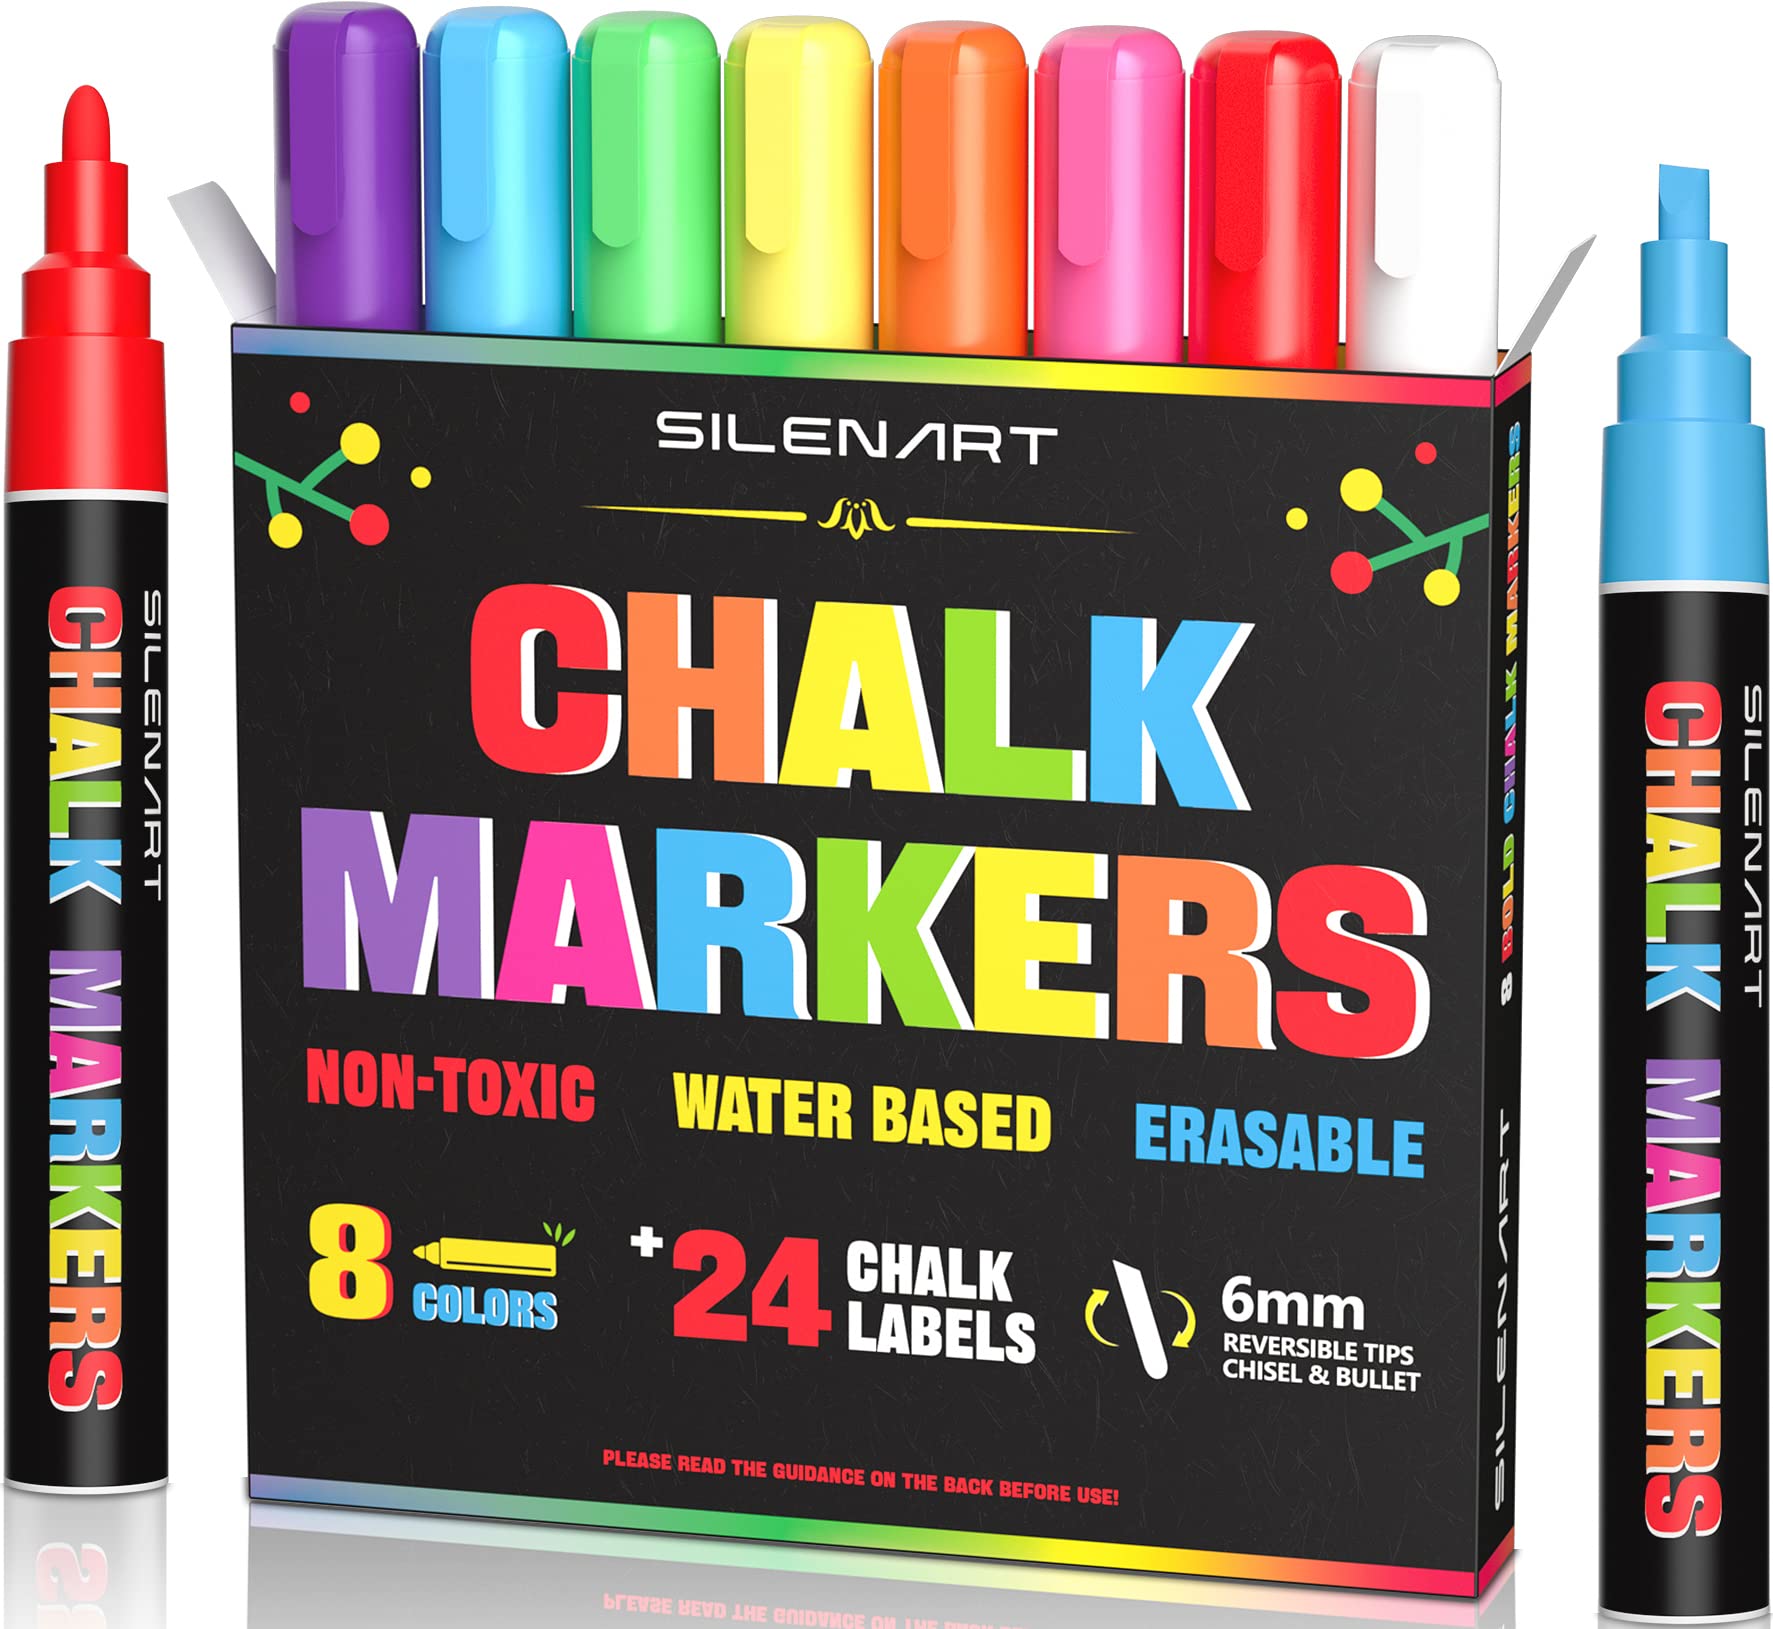 SILENART Durable Chalk Markers - Includes 8 Long-lasting Colors